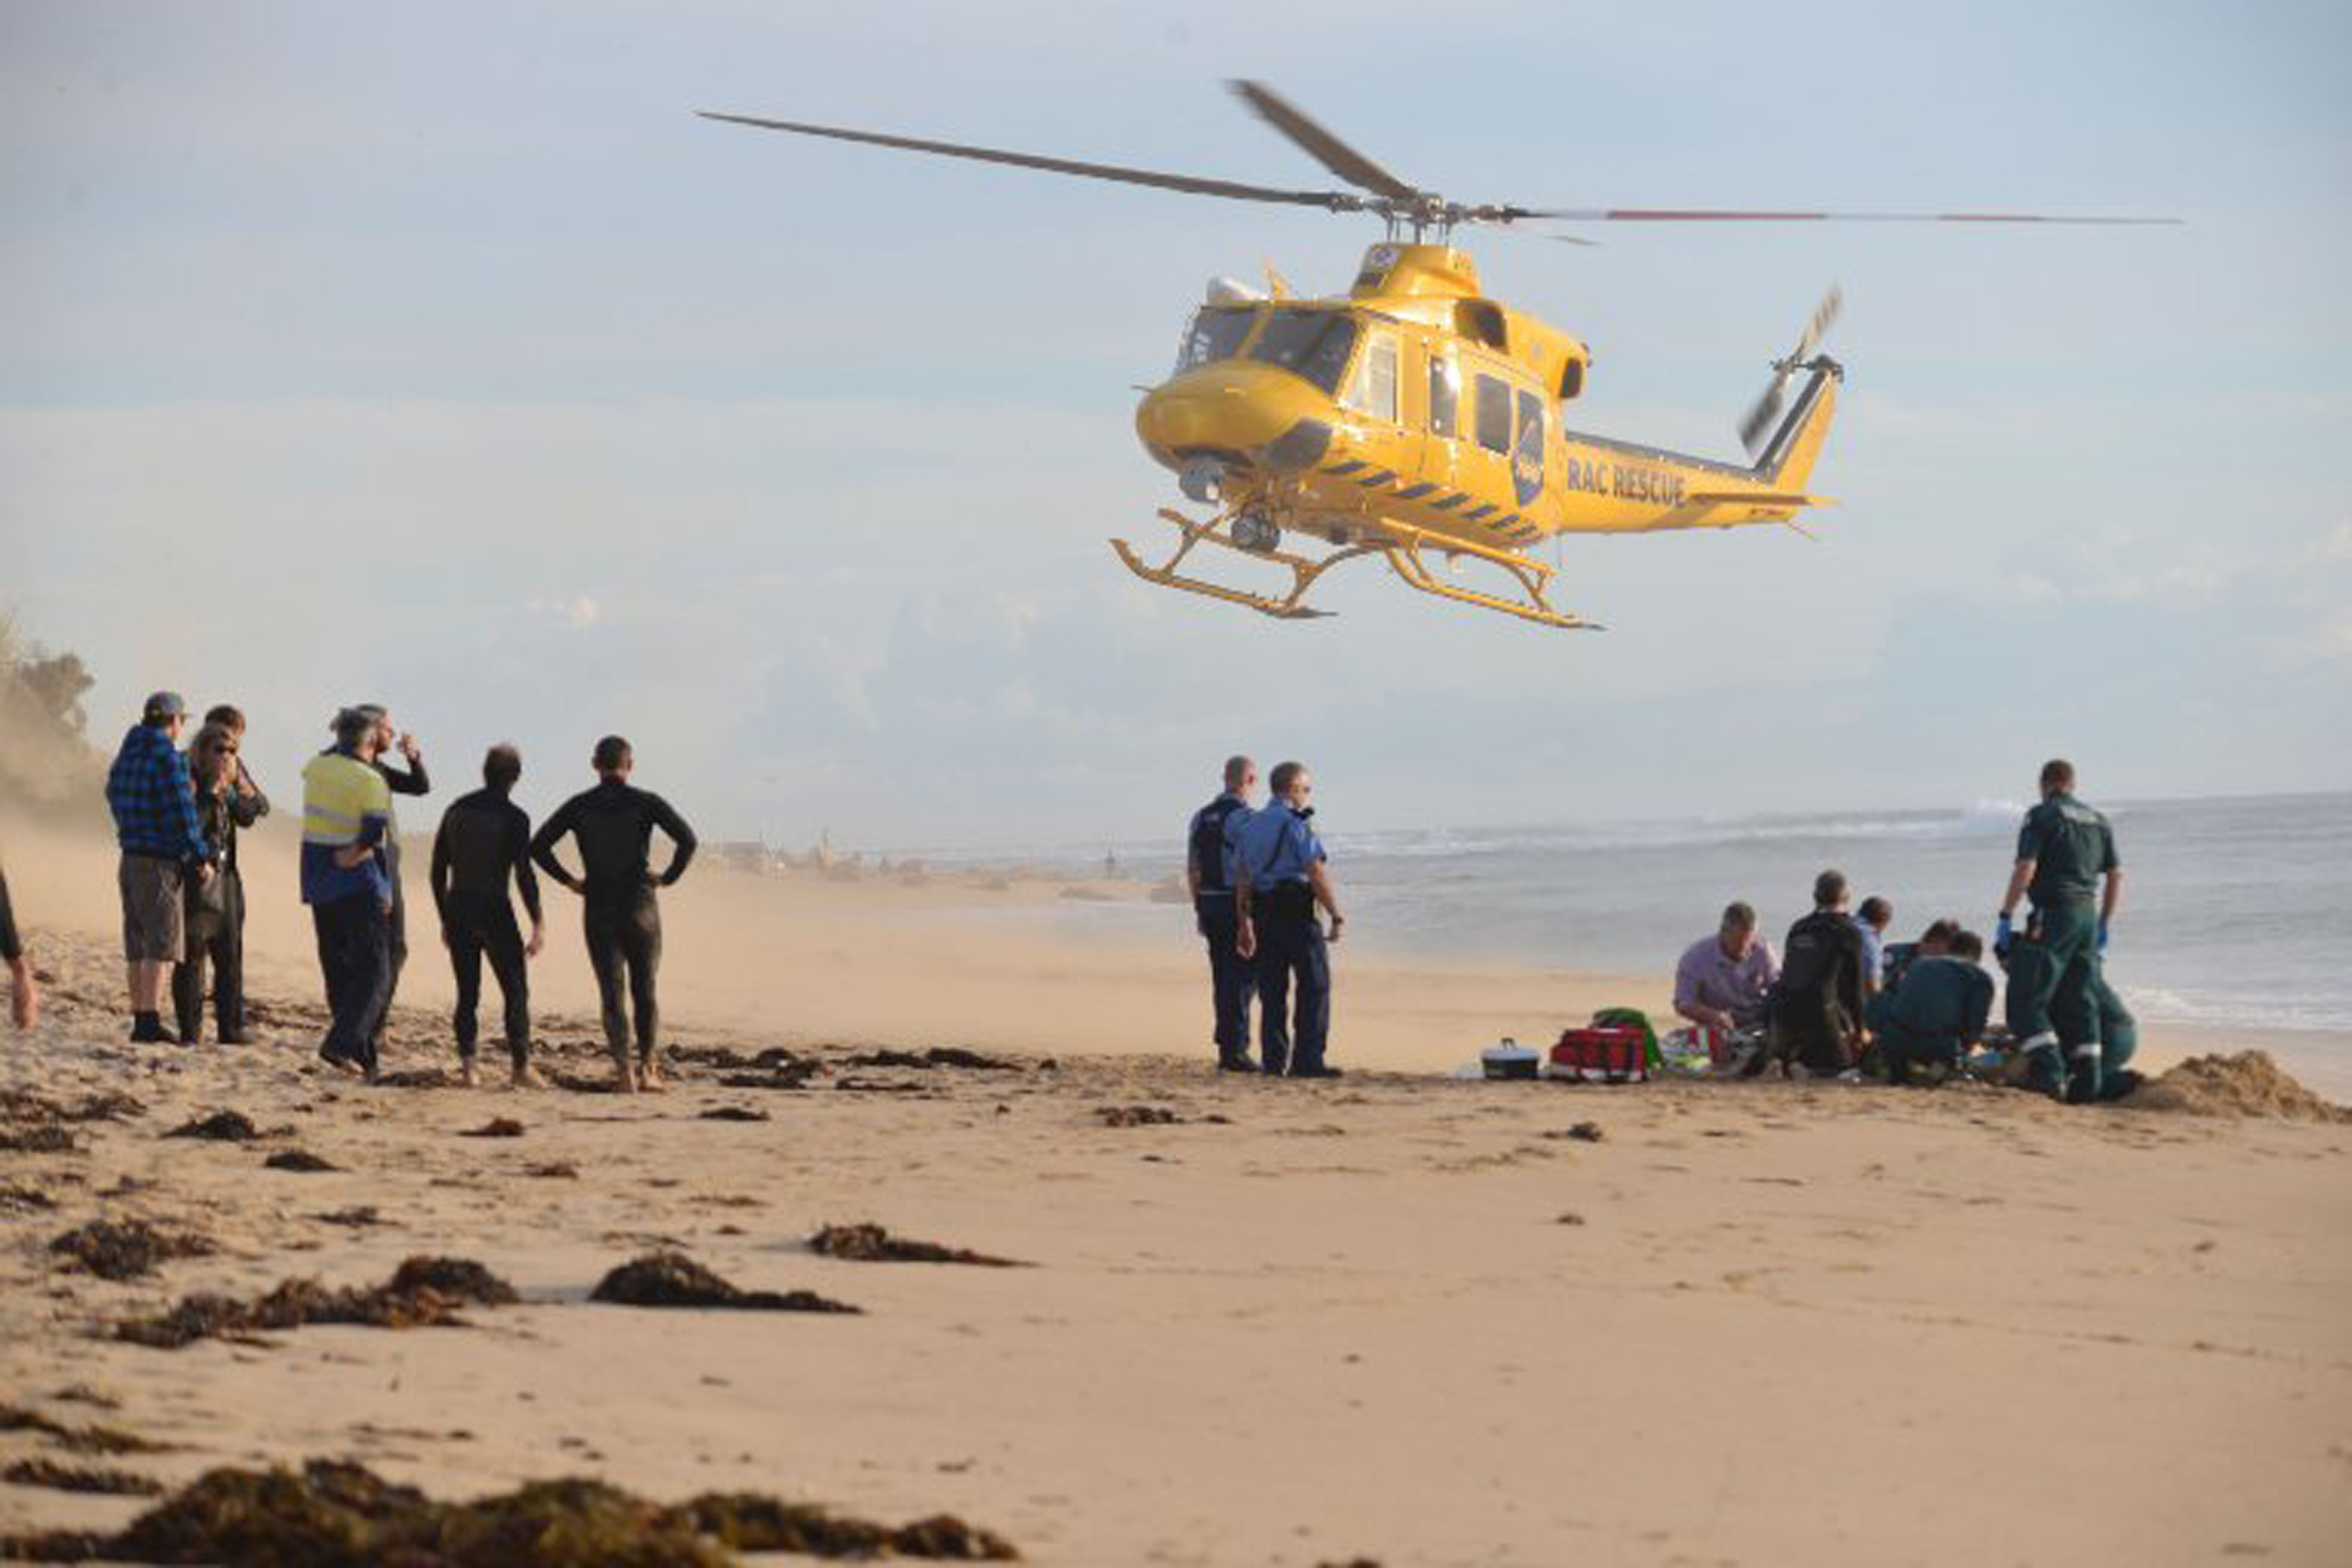 A rescue helicopter arriving to transport a critically injured surfer after a shark ripped off his leg in an attack at Falcon Beach, a suburb of Perth, Australia on May 31, 2016. (Marta Pascual Juanola—AFP/Getty Images)